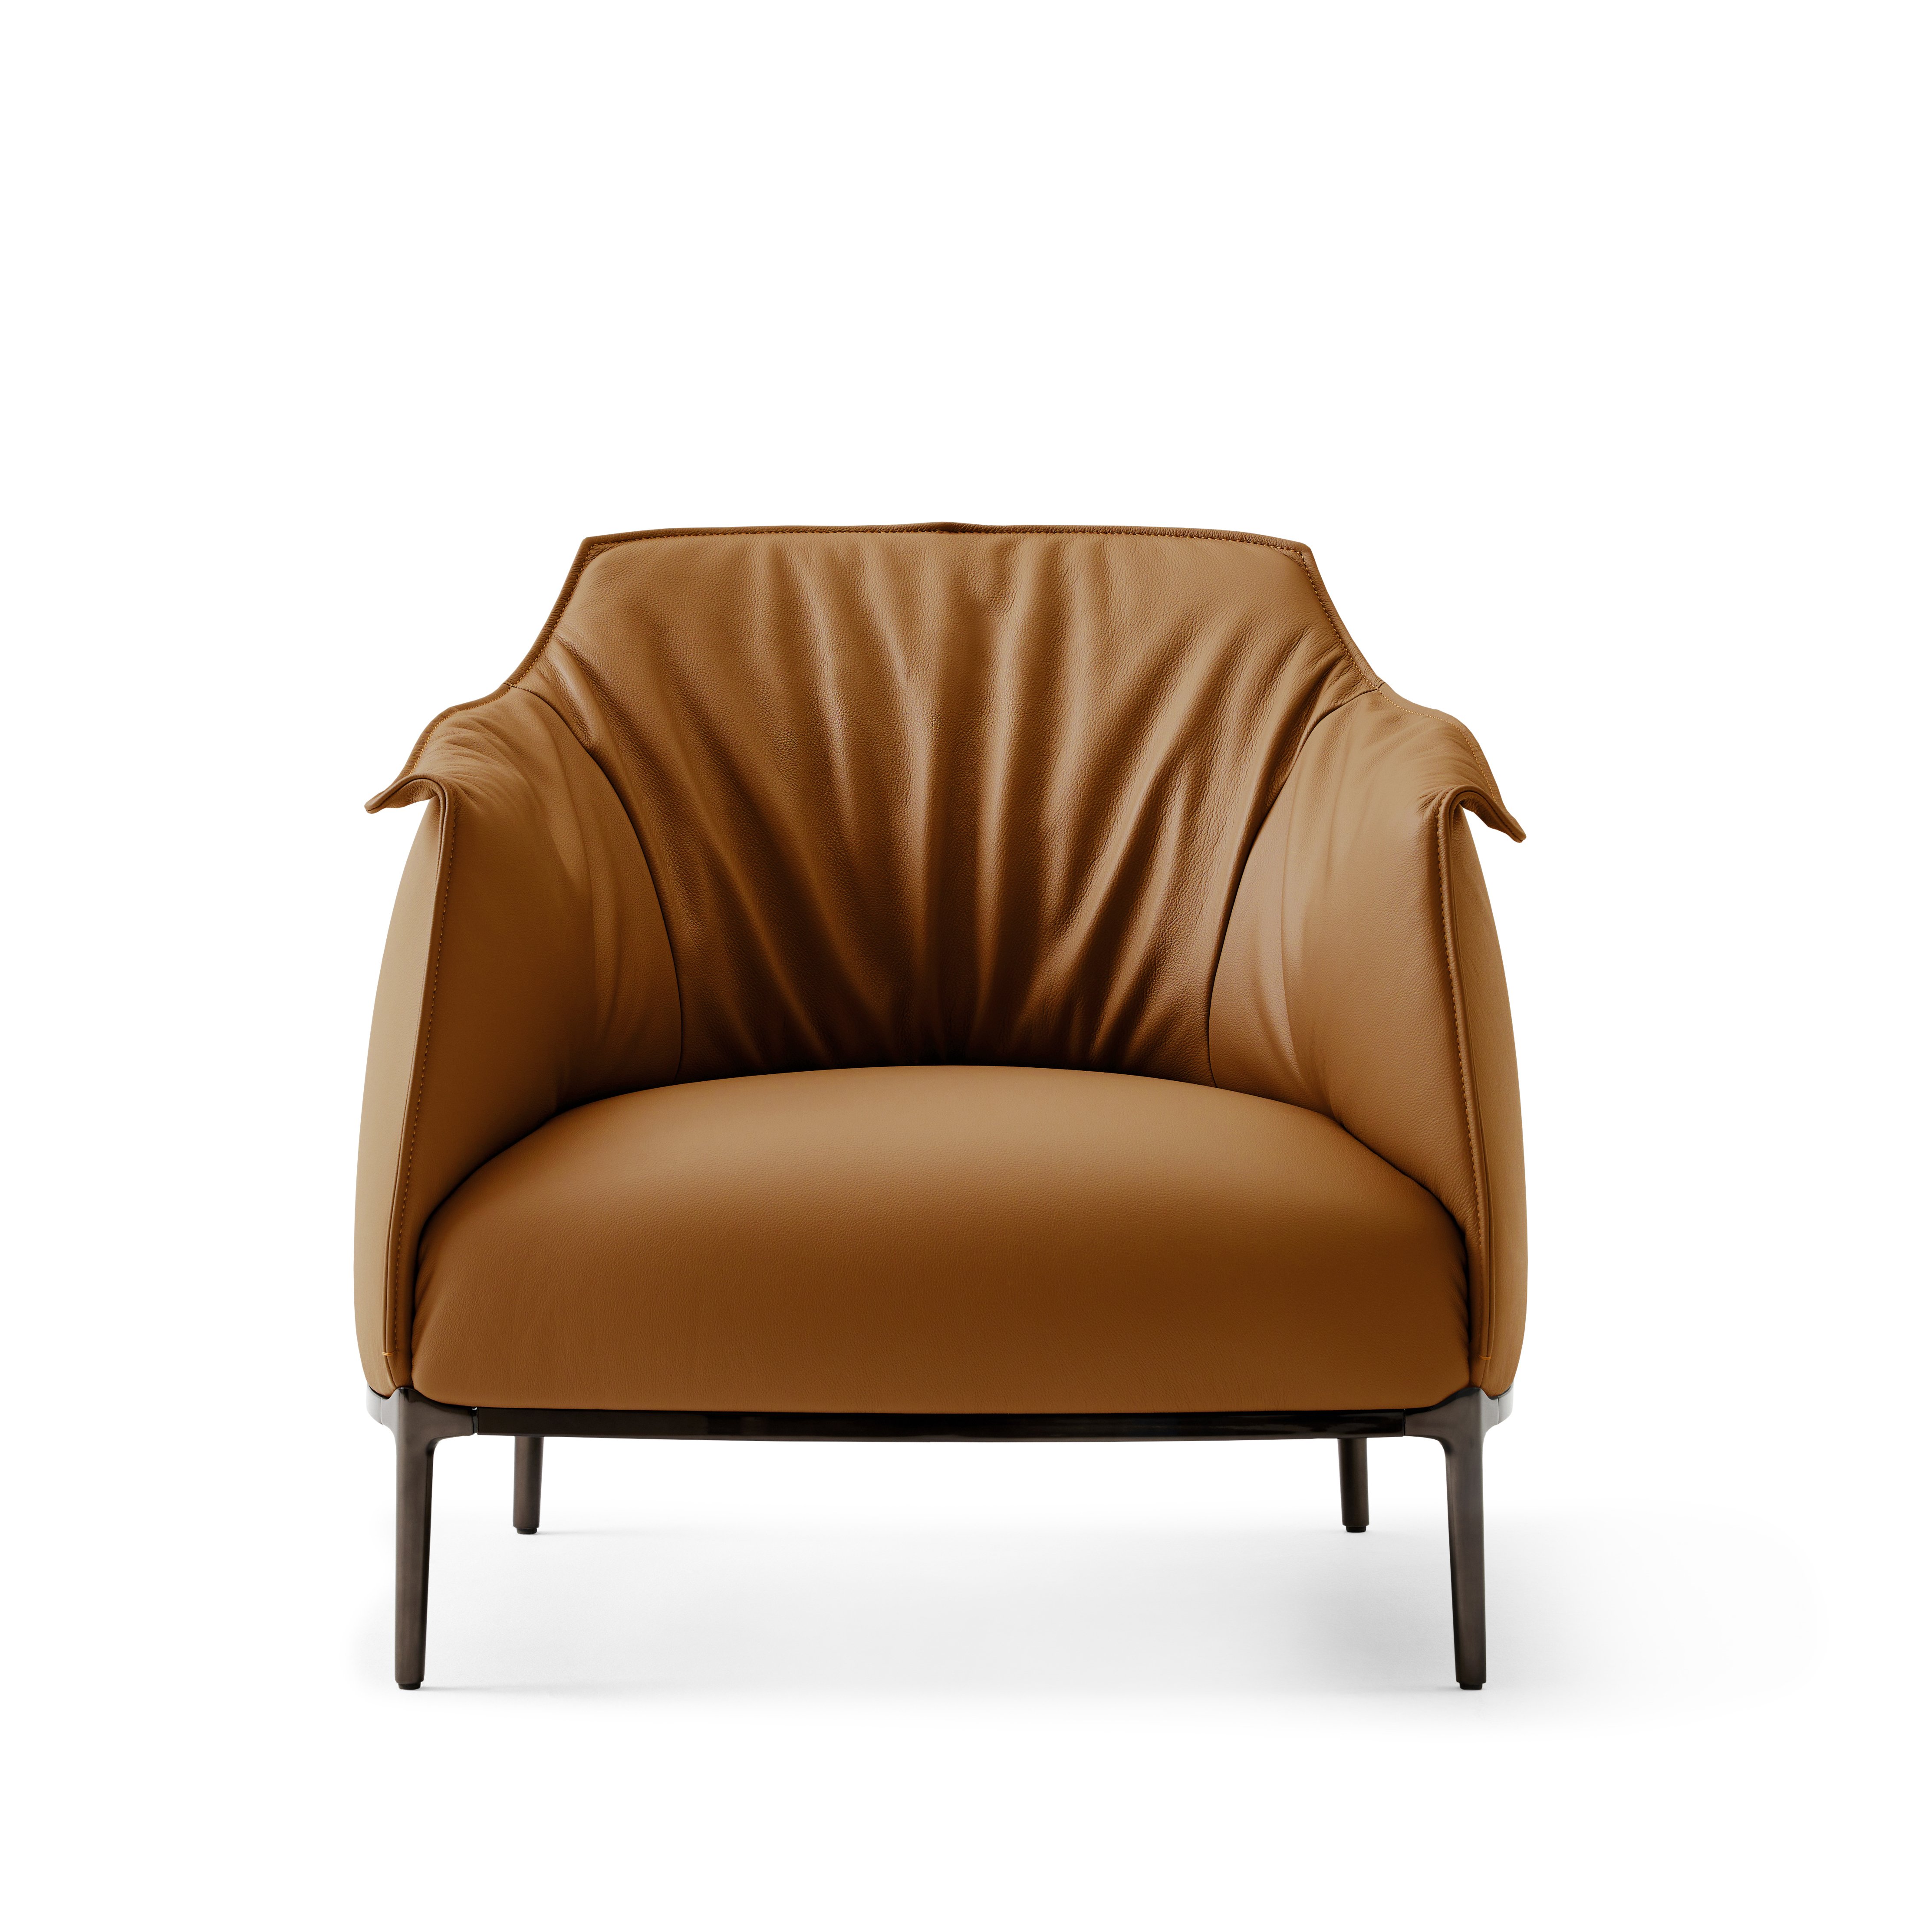 Detail front shot of the Archibald Lounge chair in Coffee